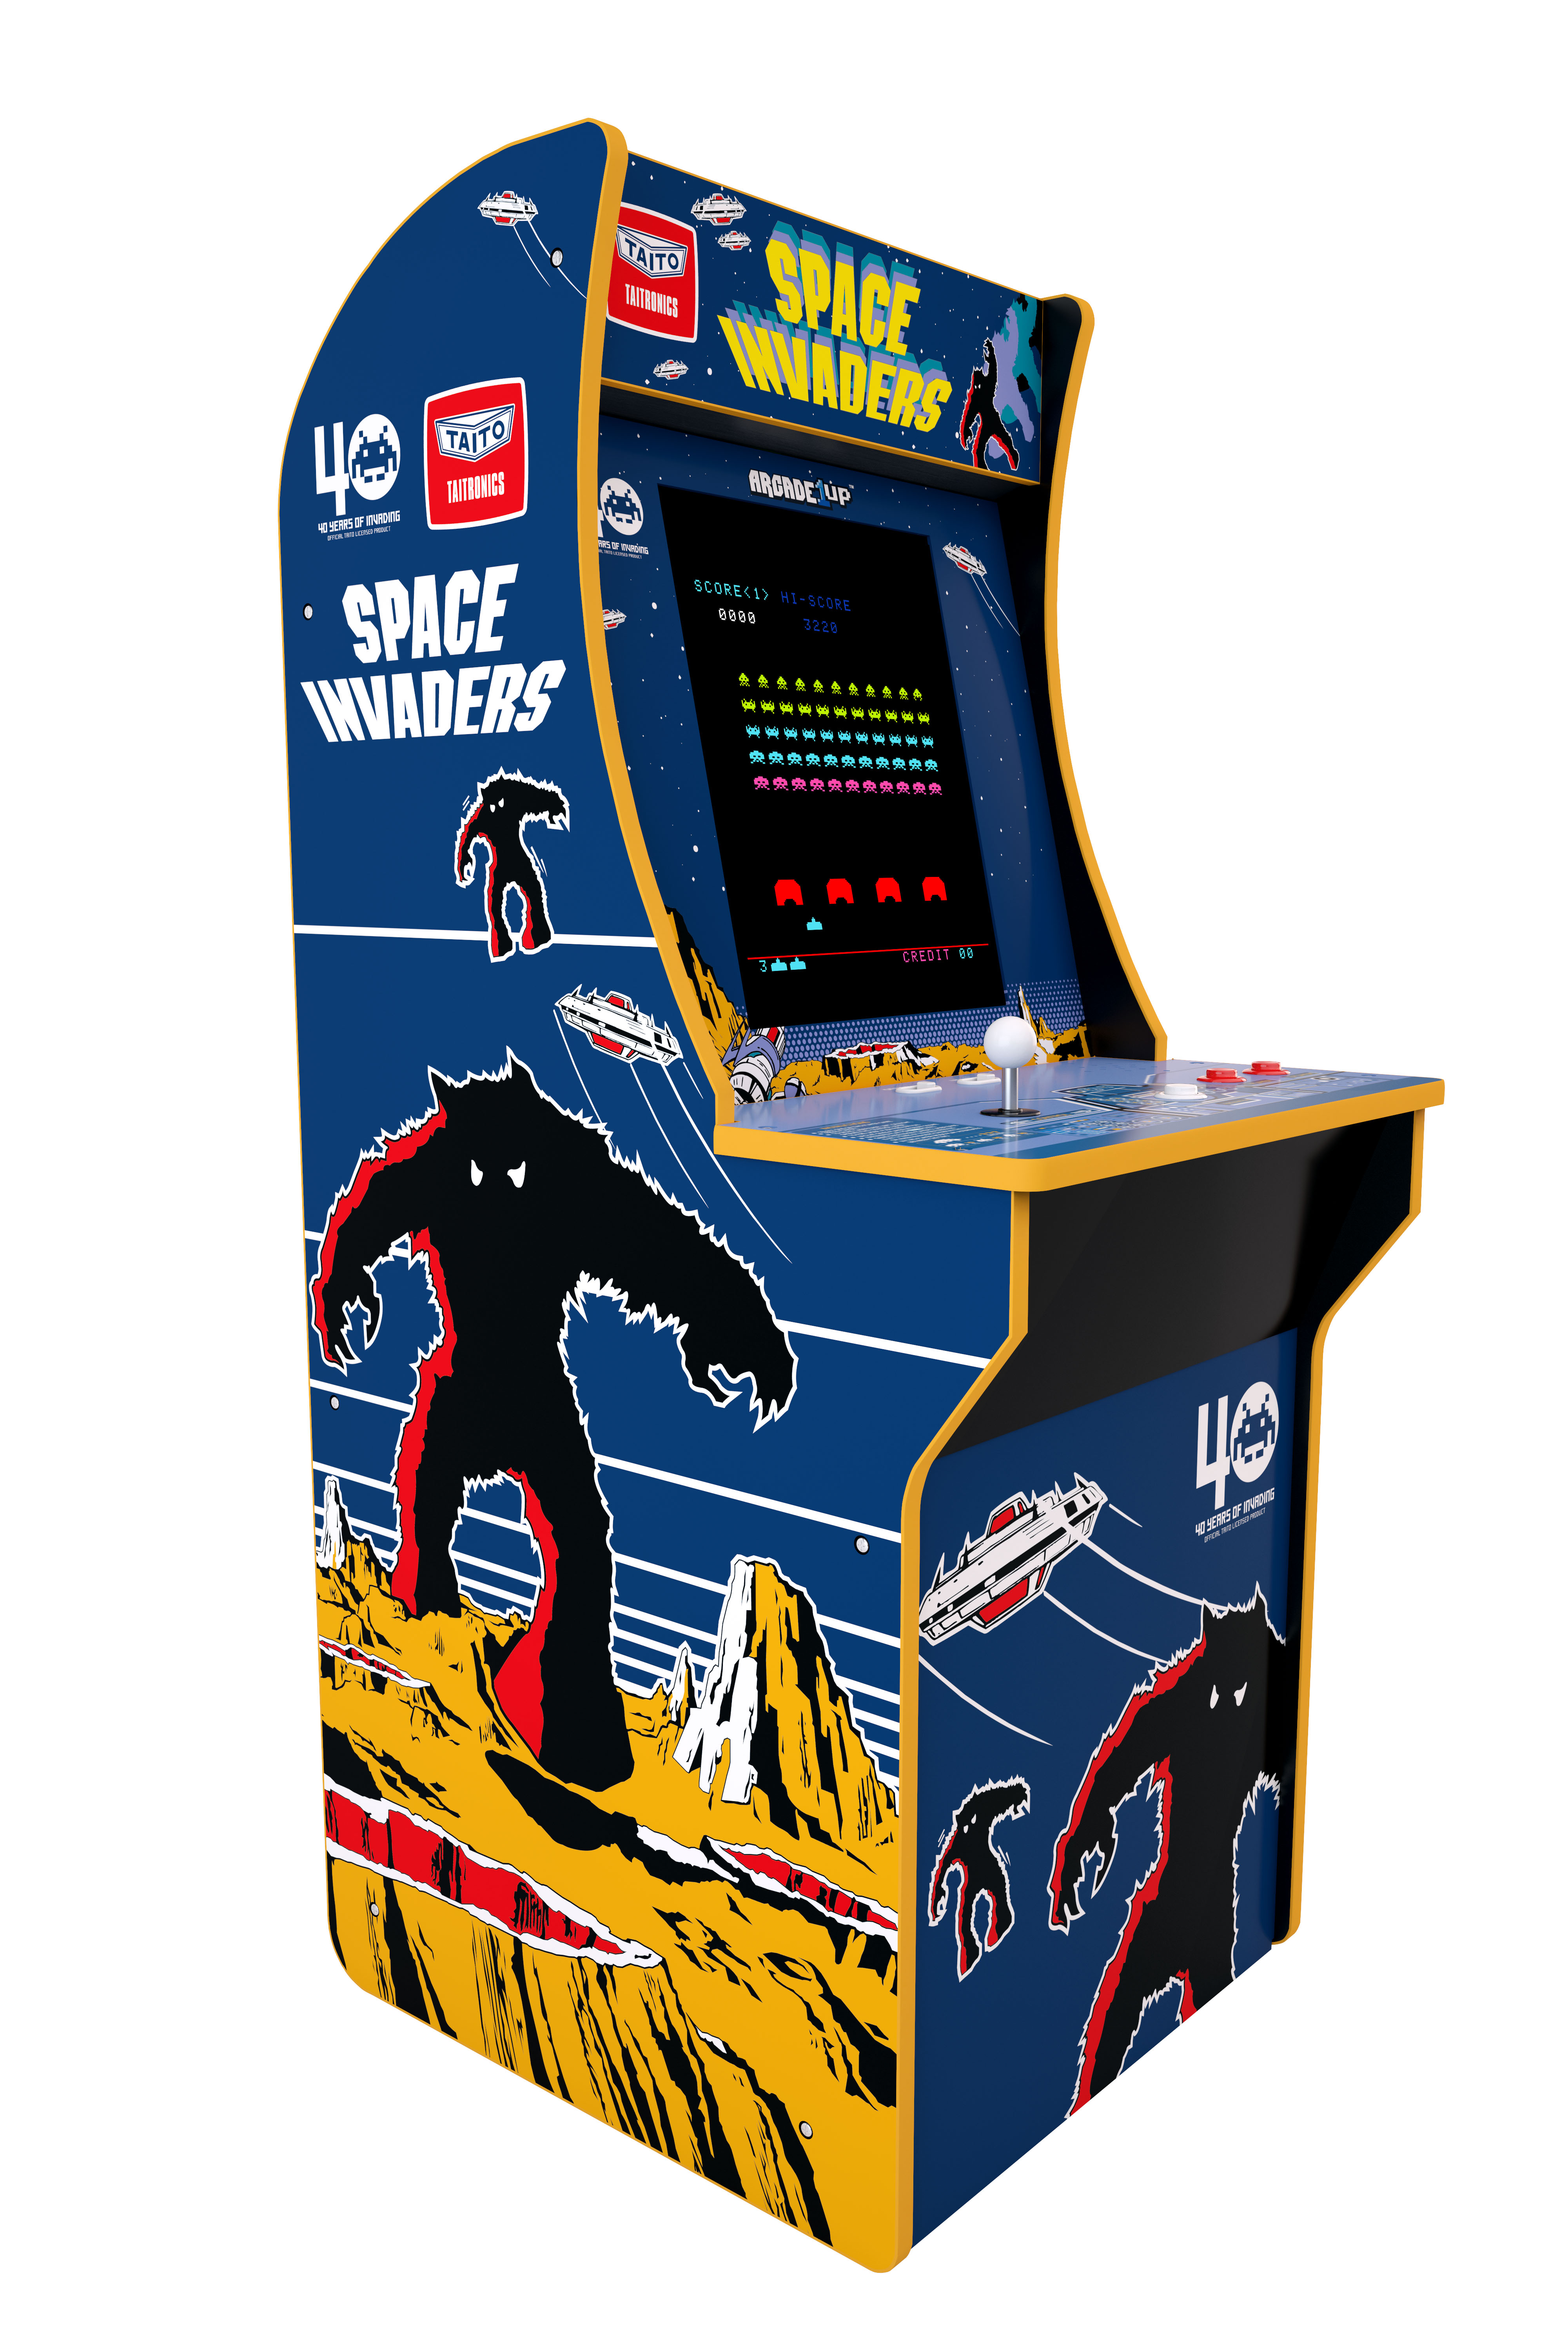 Arcade1Up, Space Invaders Arcade, 4ft - image 1 of 7